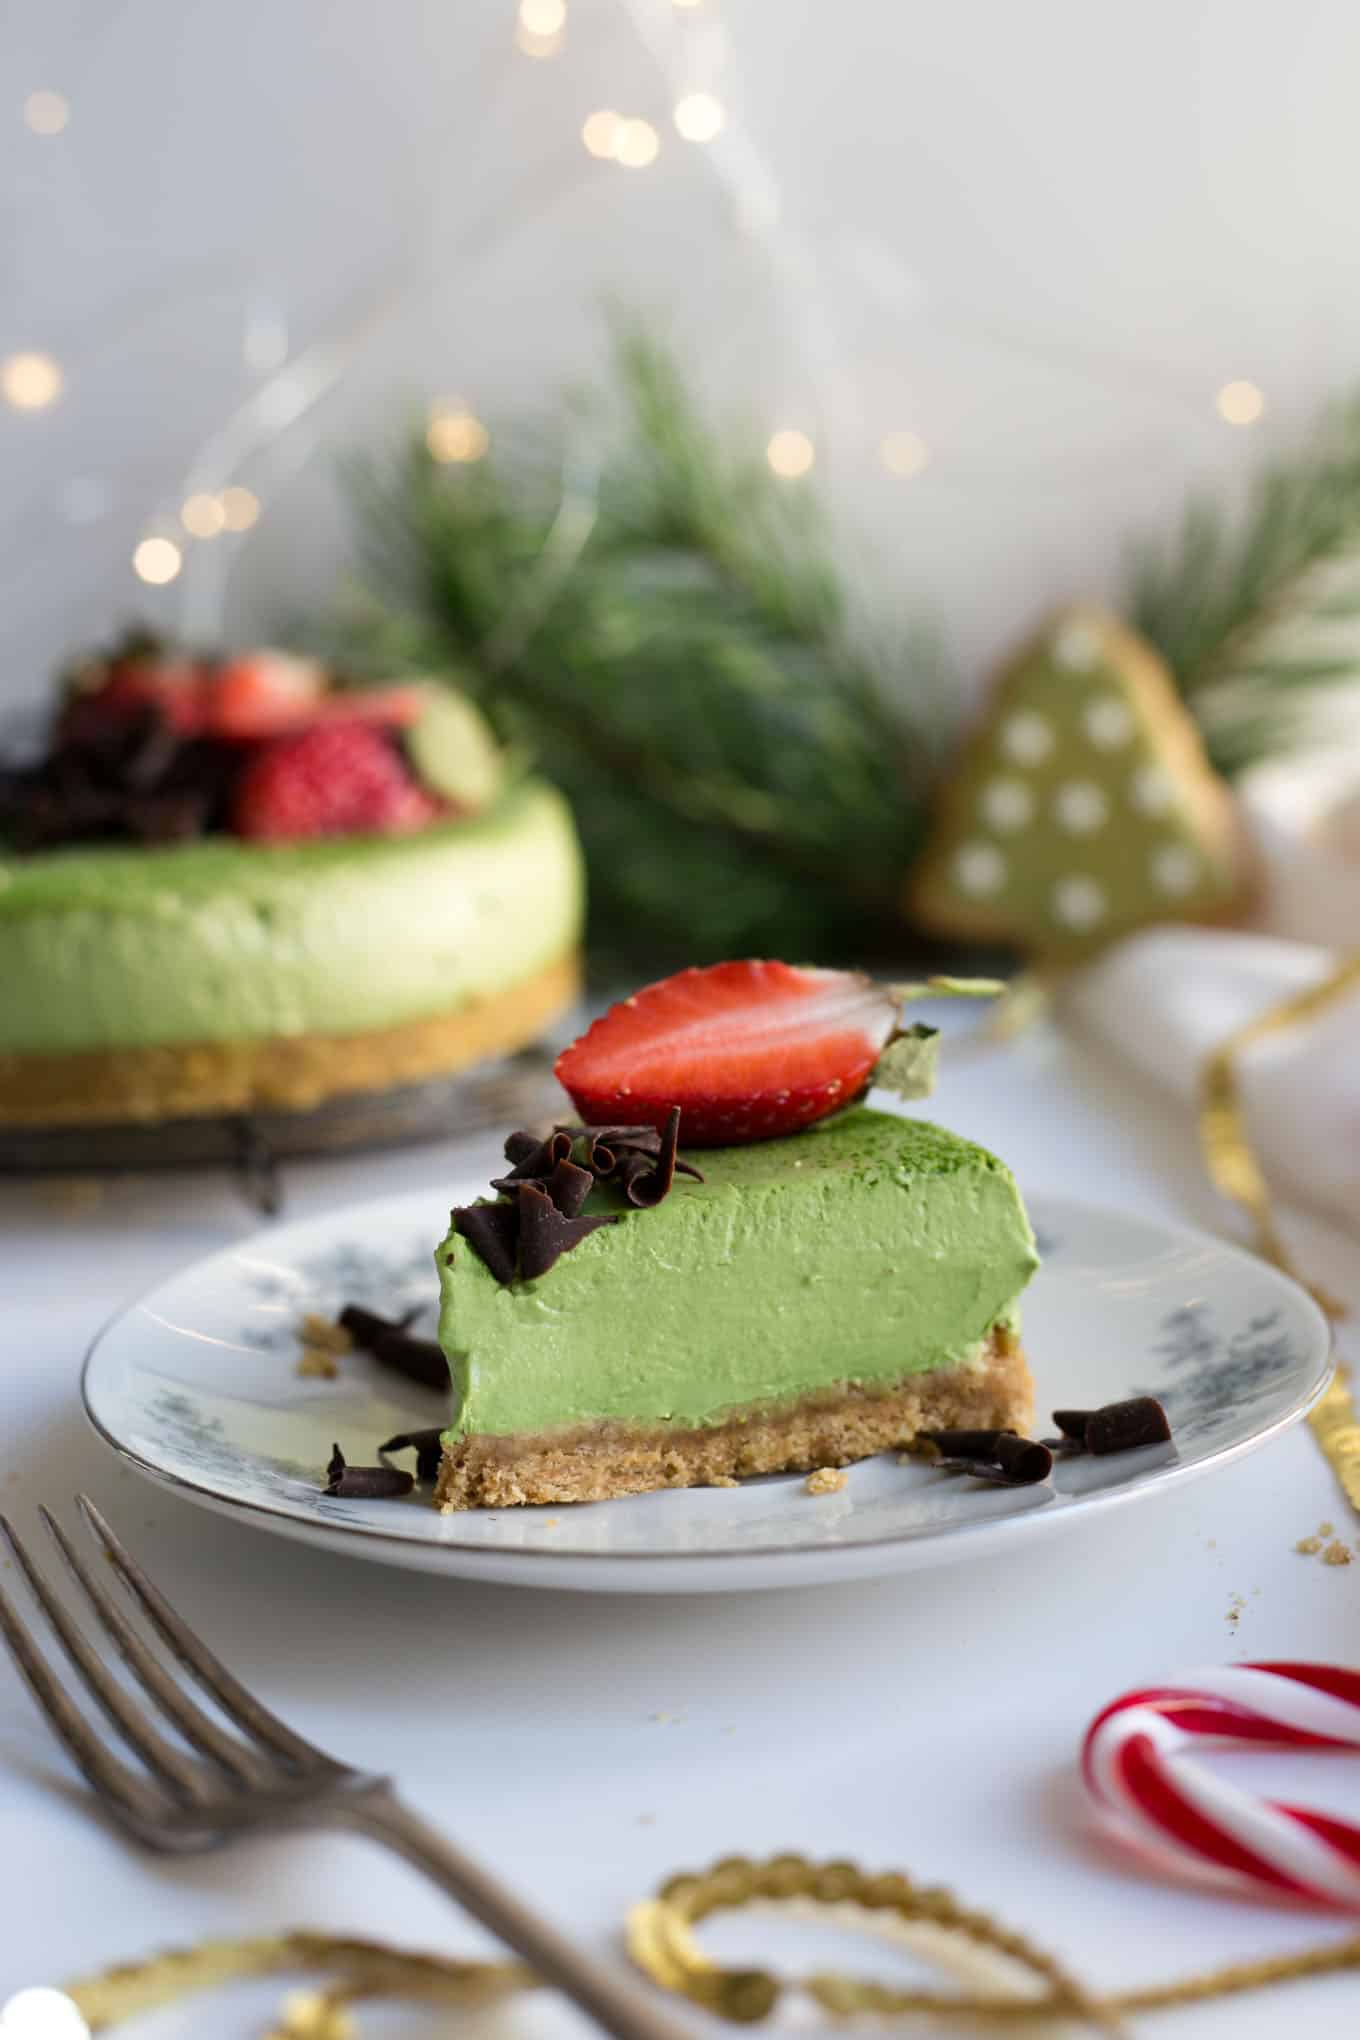 Super smooth and creamy matcha and ginger cheesecake! Easy and delicious cake, perfect centrepiece for your Christmas table! #vegan #matcha #christmas #cheesecake | via @annabanana.co 